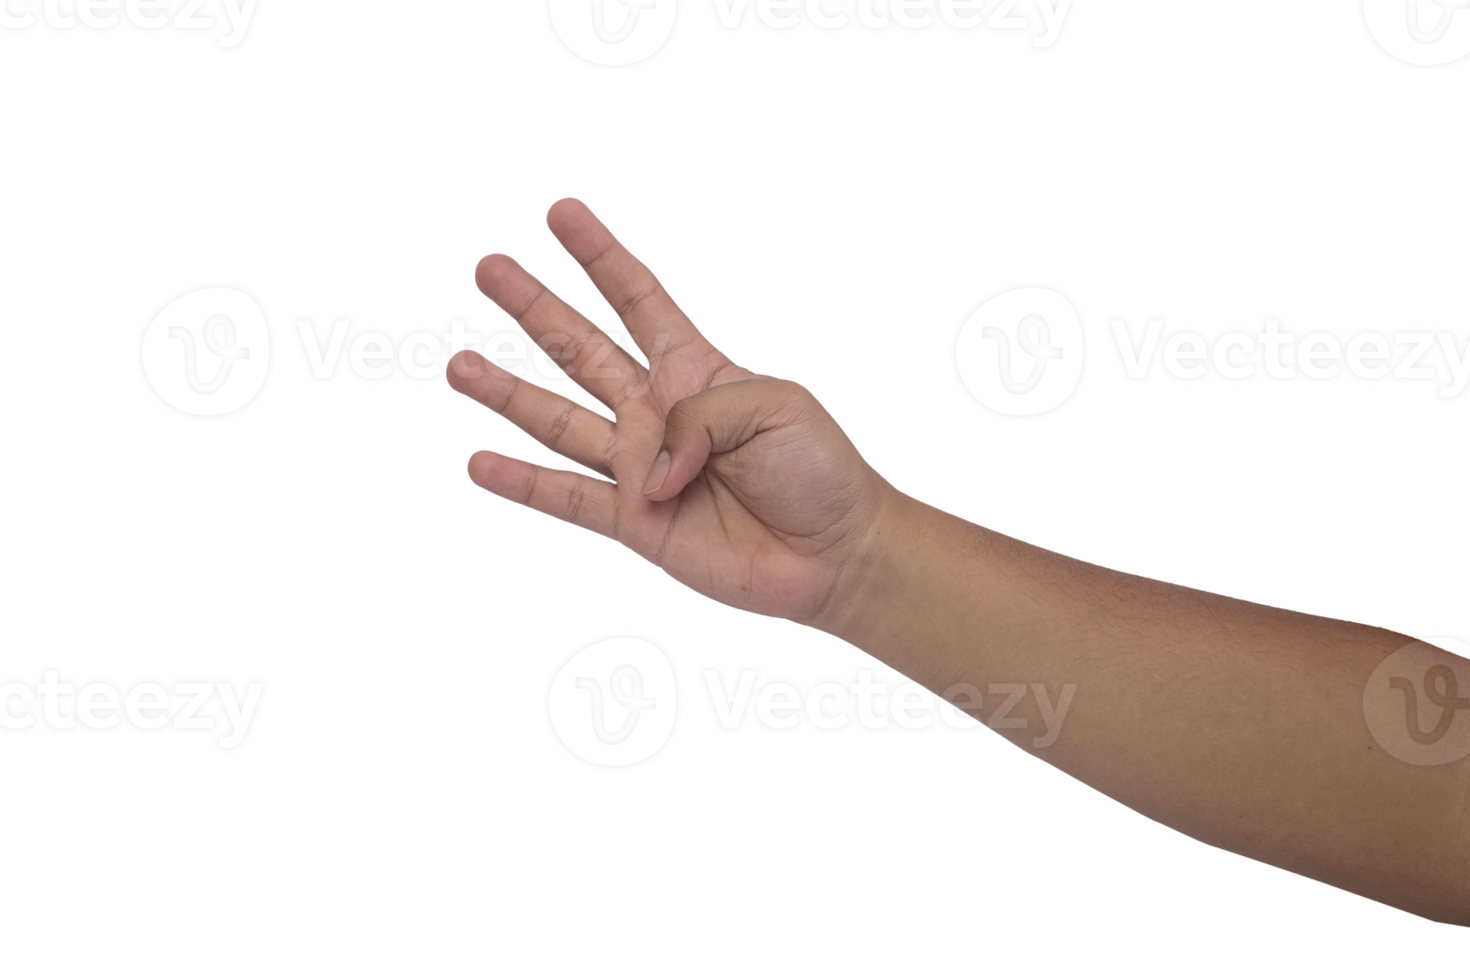 hand gesture of an asian man using the number four symbol png